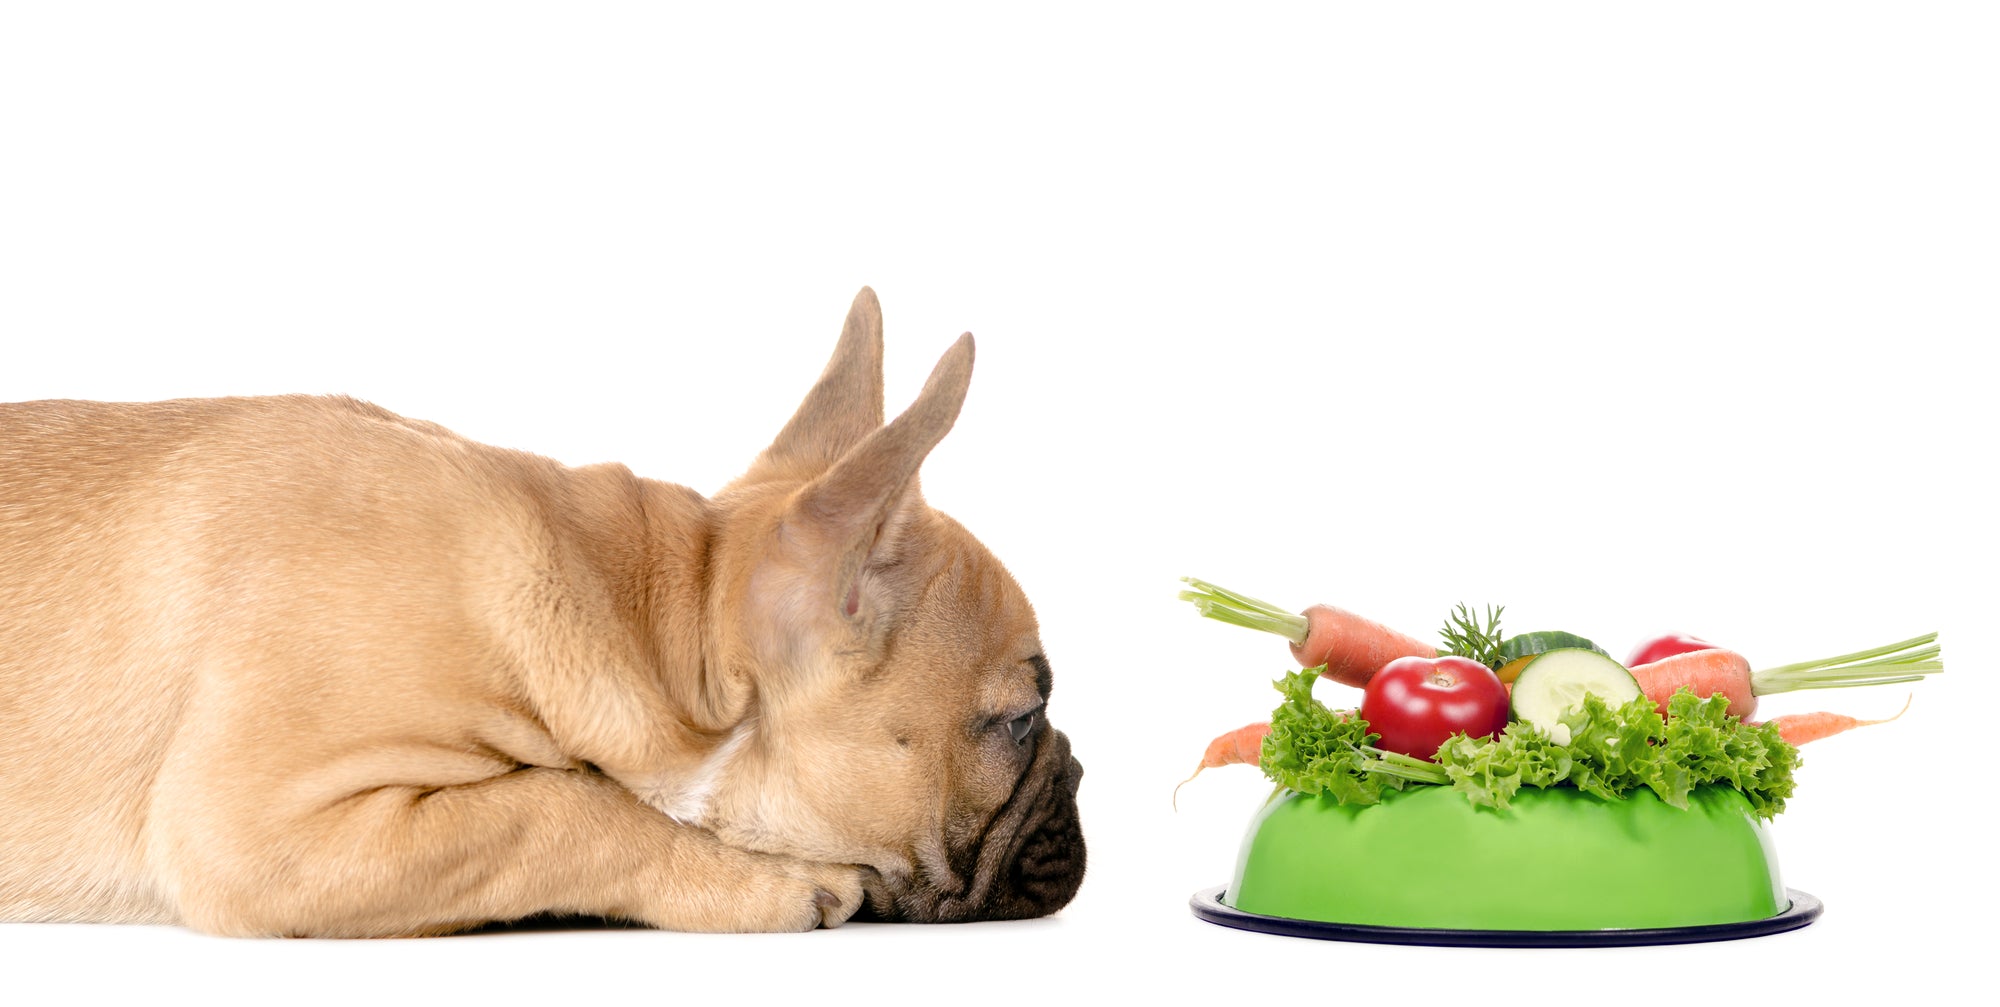 Cancer in Dogs: 5 Vegetables That Help Prevent this Disease